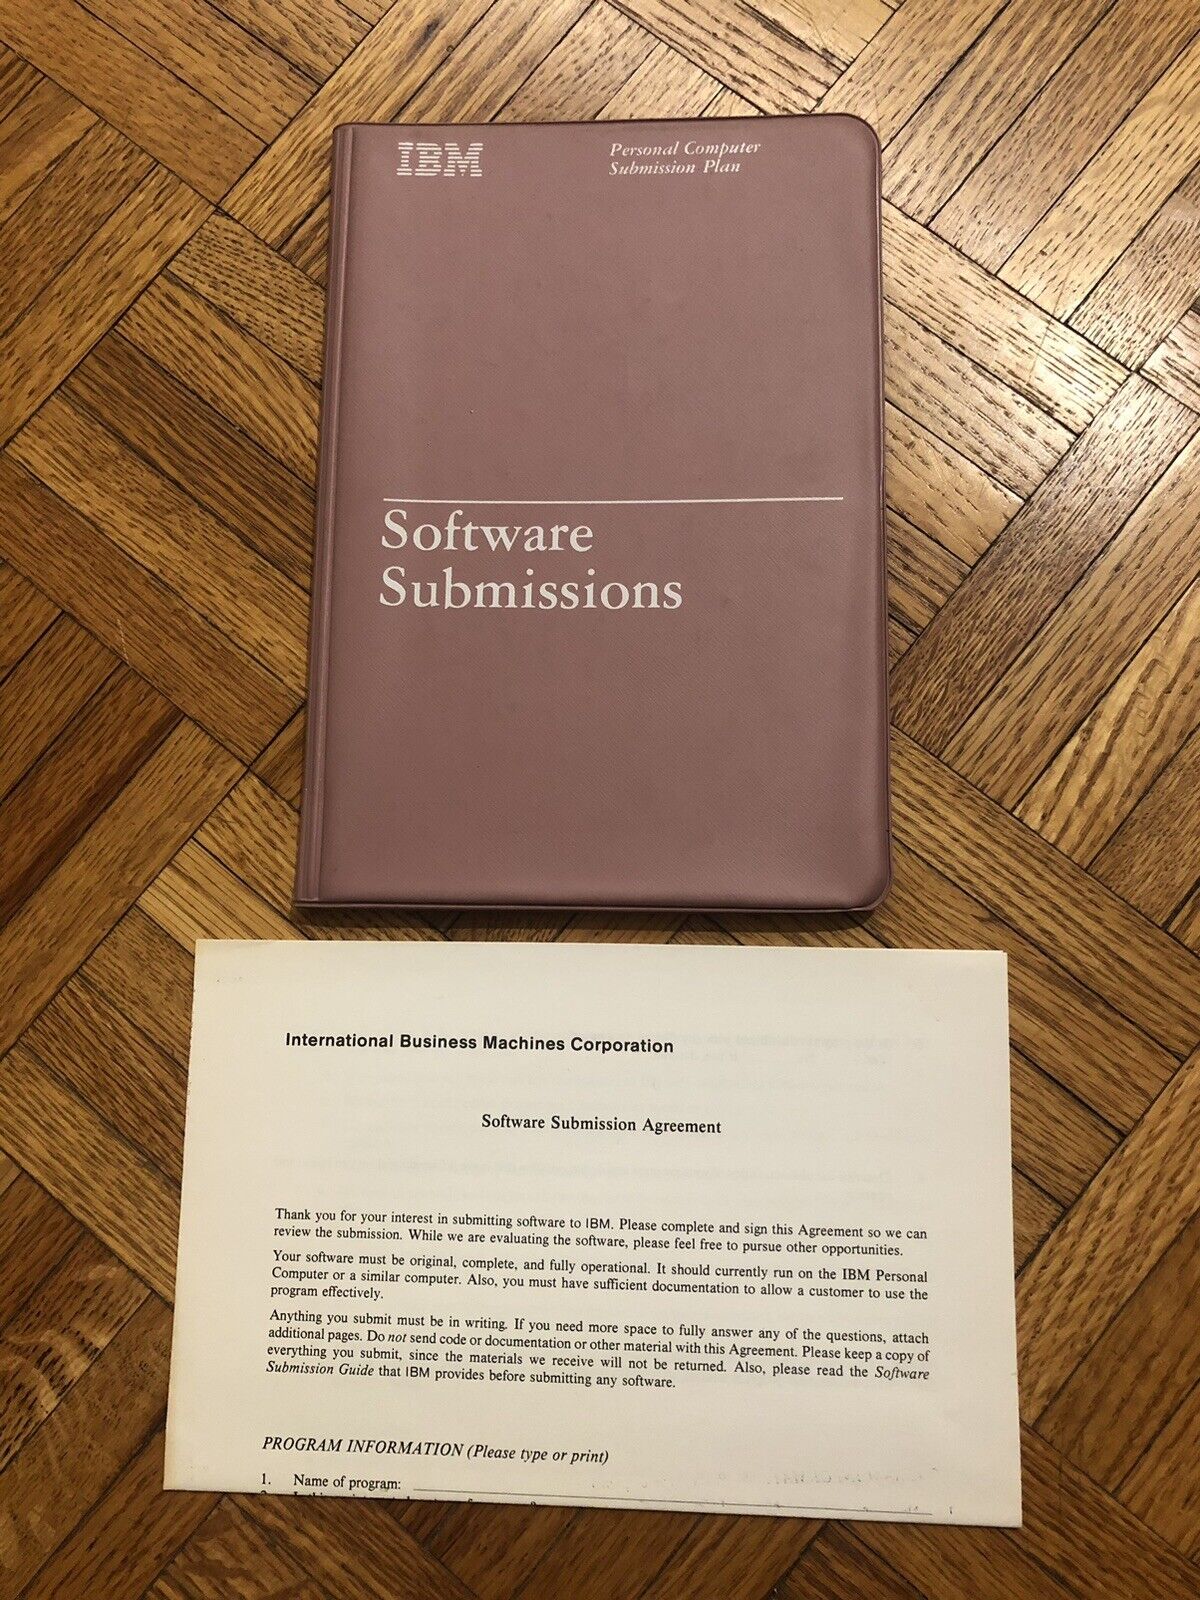 1982 IBM Personal Computer Software Submissions Guide - SCARCE